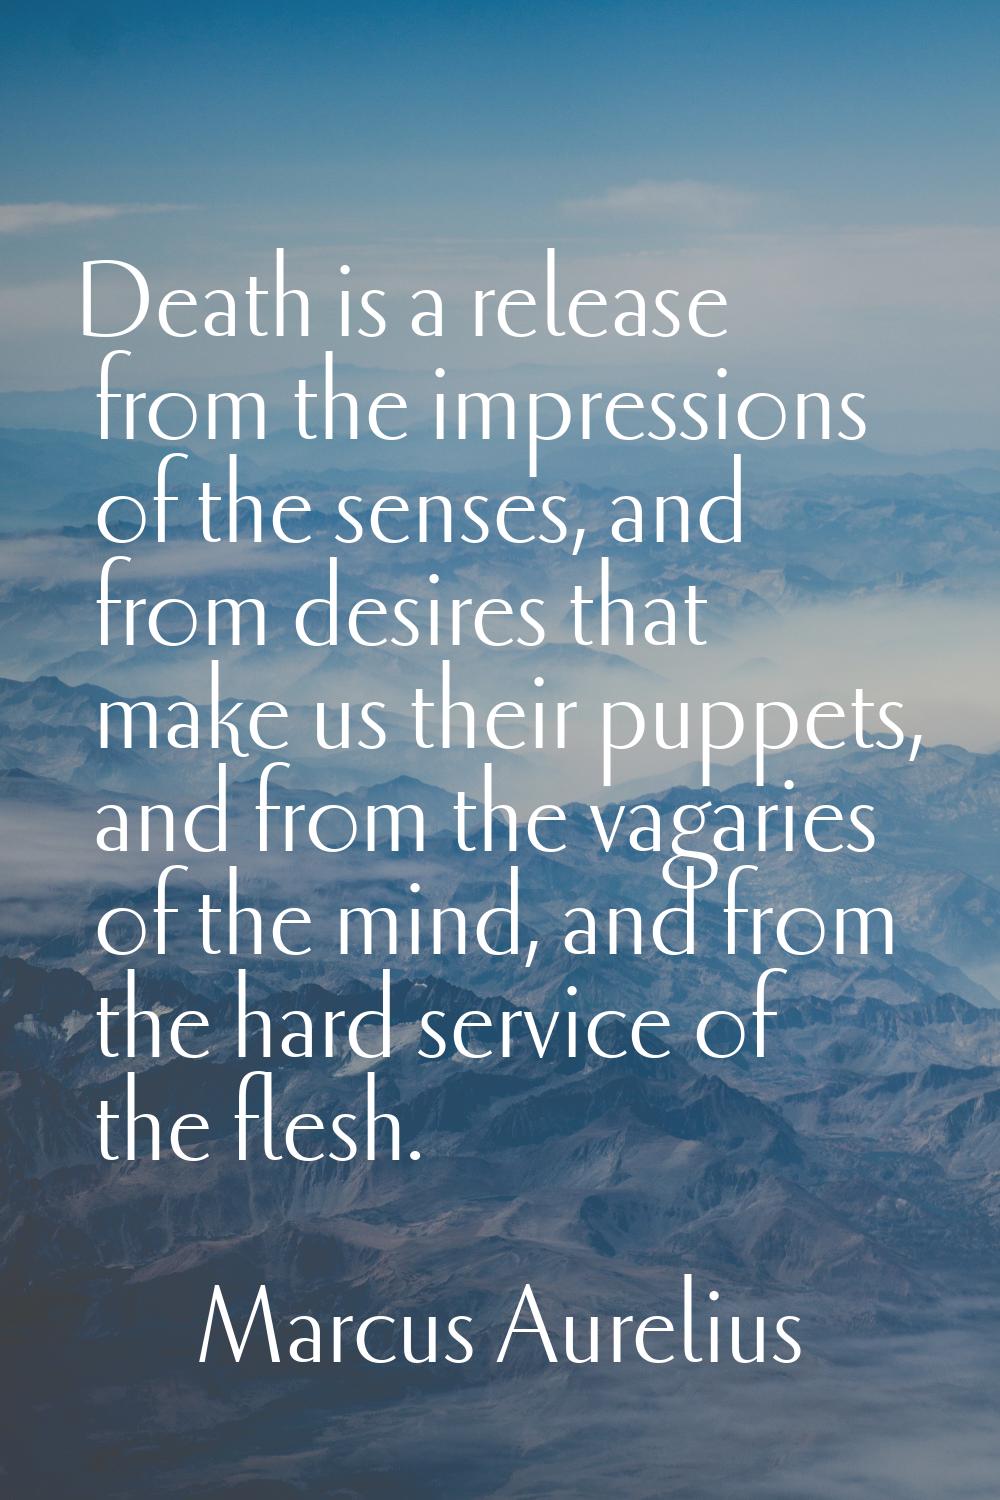 Death is a release from the impressions of the senses, and from desires that make us their puppets,